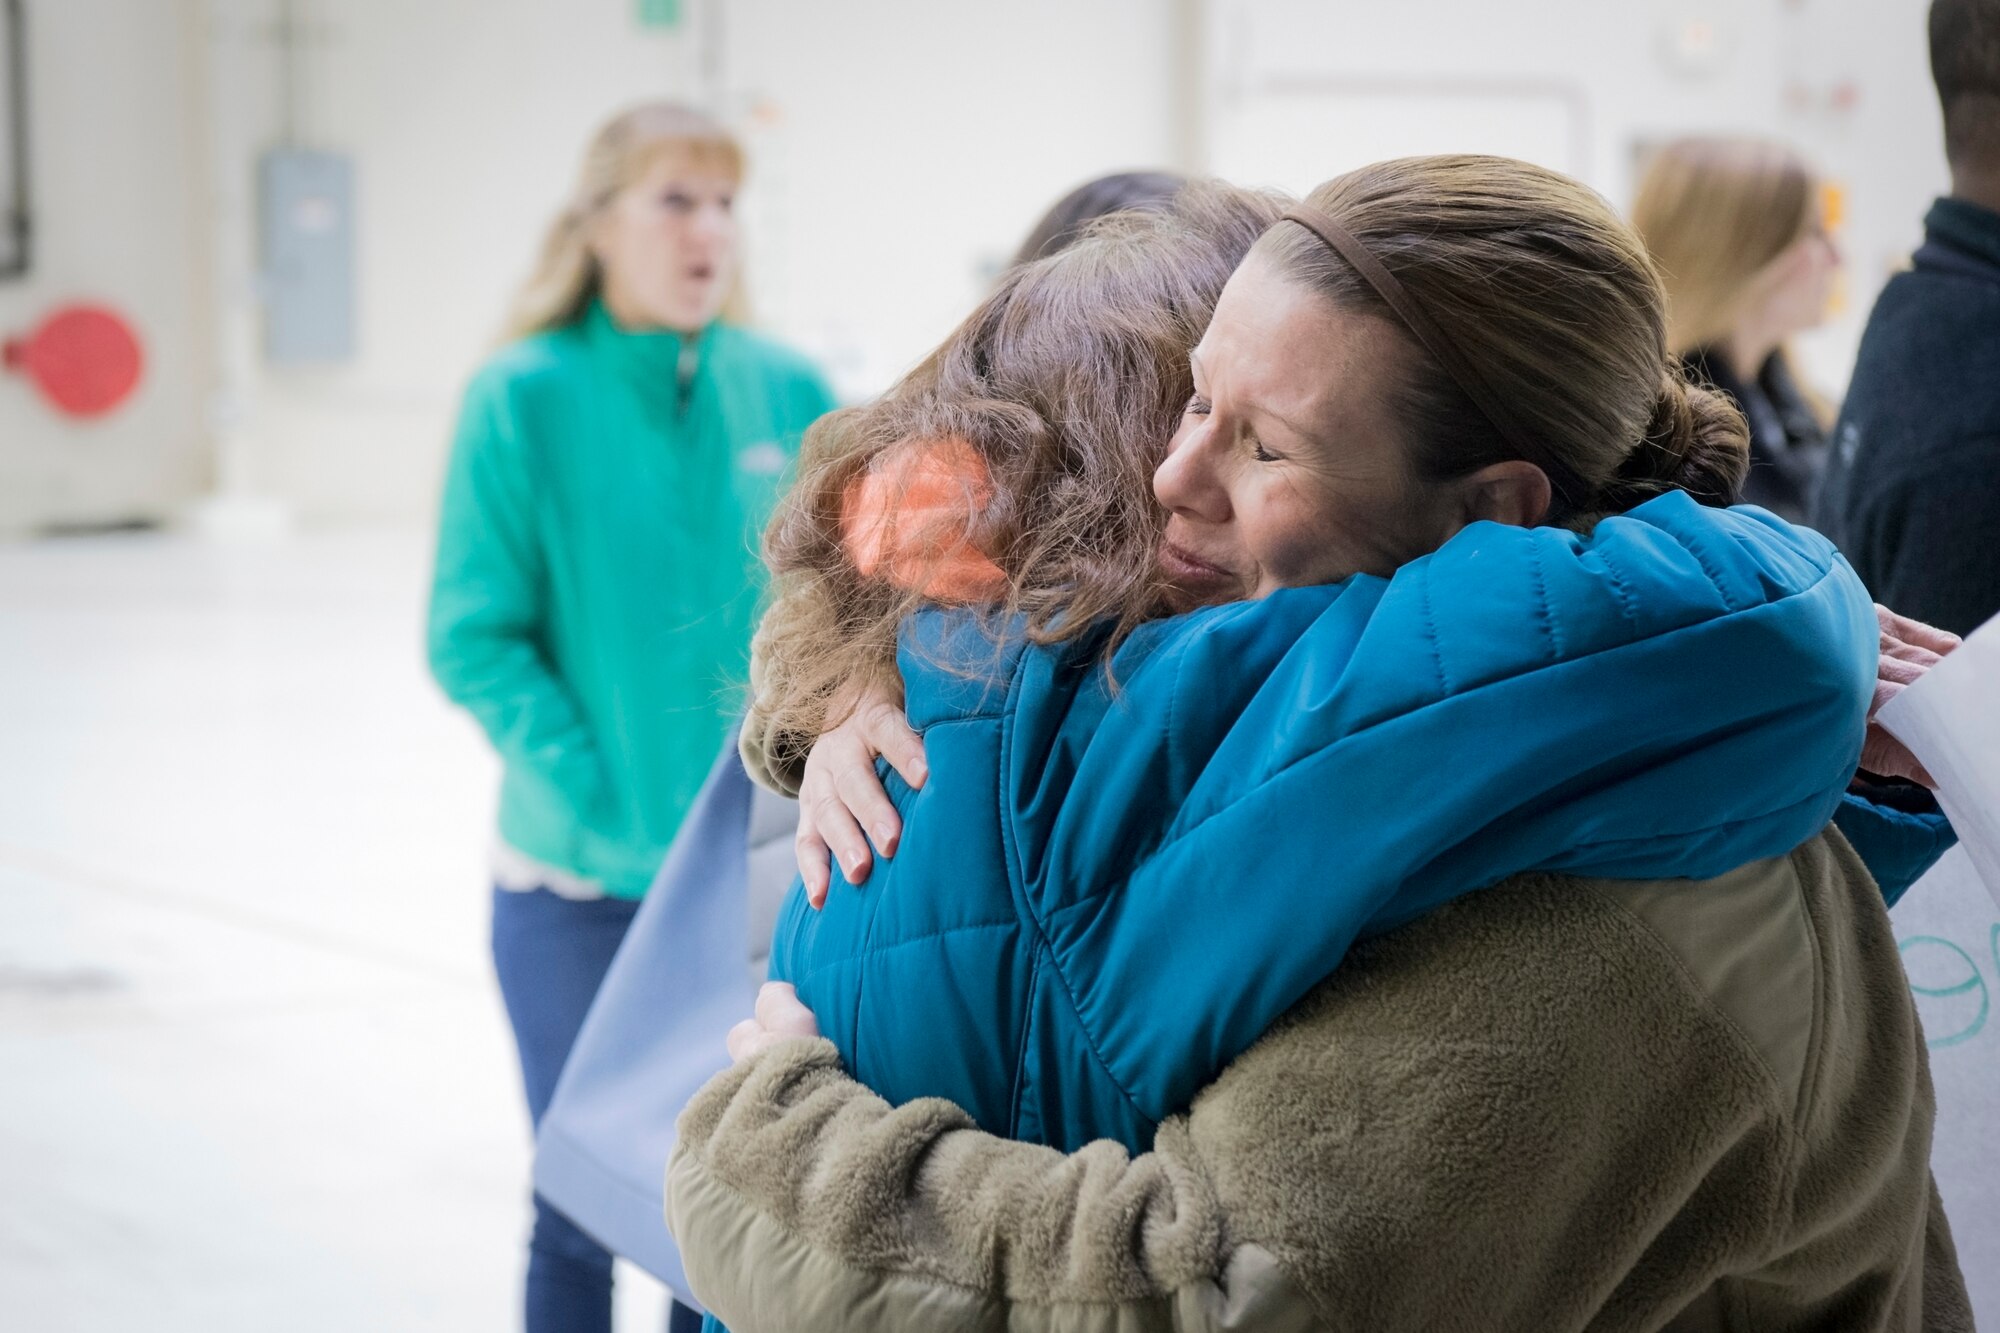 Tech. Sgt. Christina Howland, 434th Operations Support Squadron aircrew flight equipment NCOIC, hugs her mother, Karen Lile, after arriving at Grissom Air Reserve Base, Ind. Jan. 8, 2019. Howland was one of 18 Airmen and three KC-135s who returned home following a deployment to Southwest Asia. (U.S. Air Force photo / Master Sgt. Ben Mota)